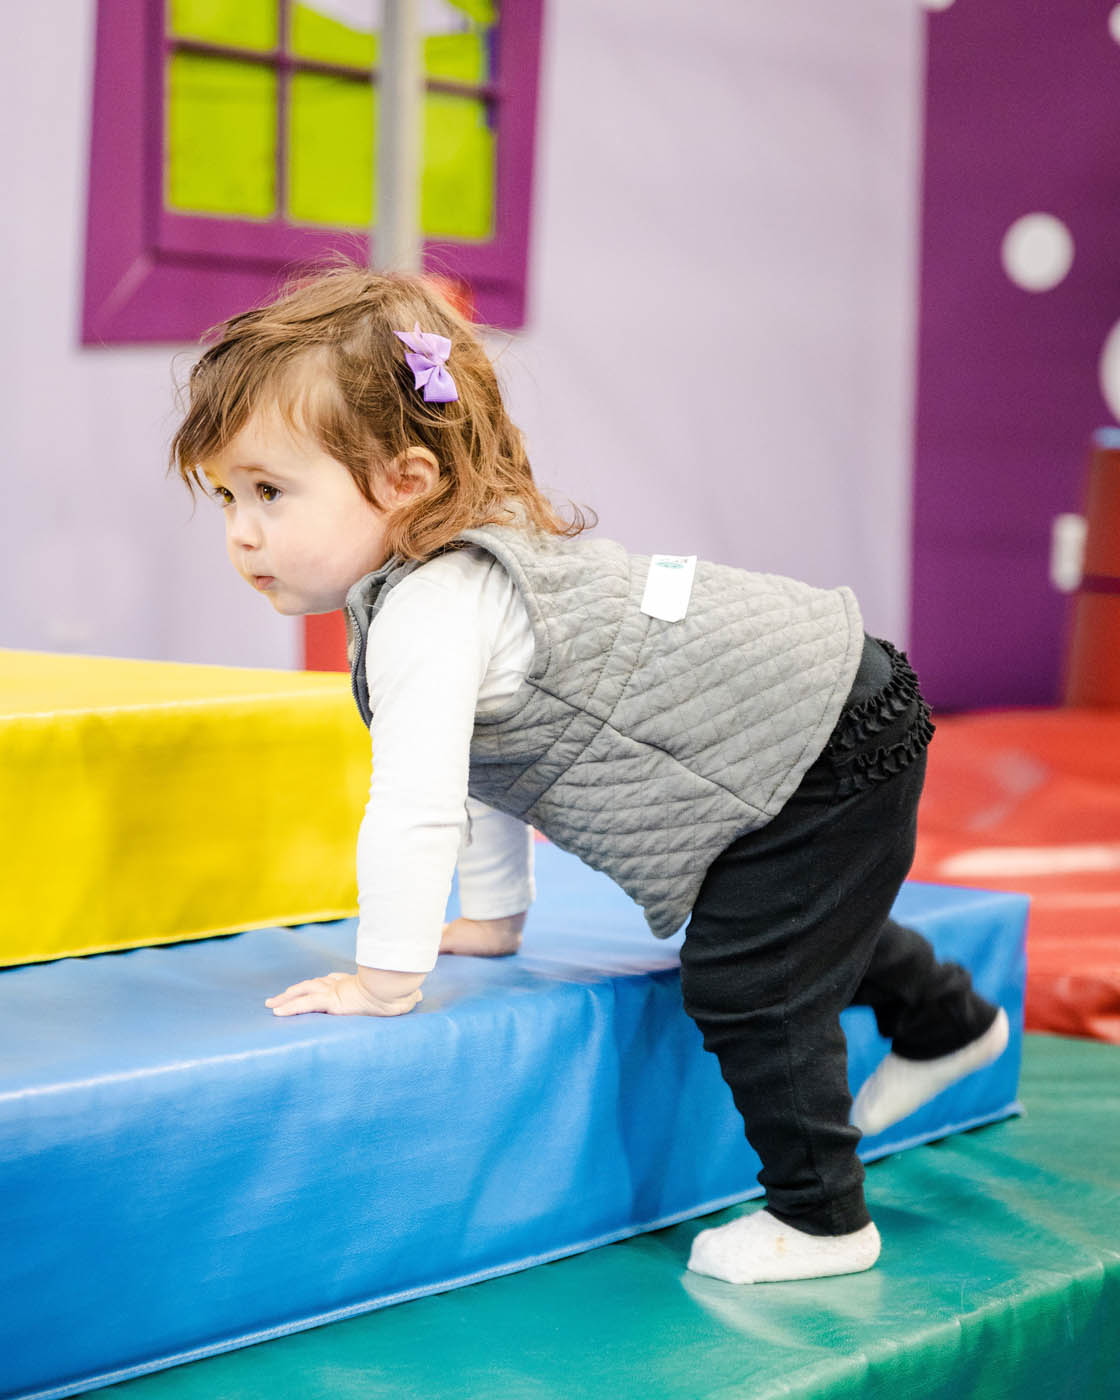 A little girl climbing on soft tumbling equipment for toddlers at Romp n' Roll in Charlotte, NC.